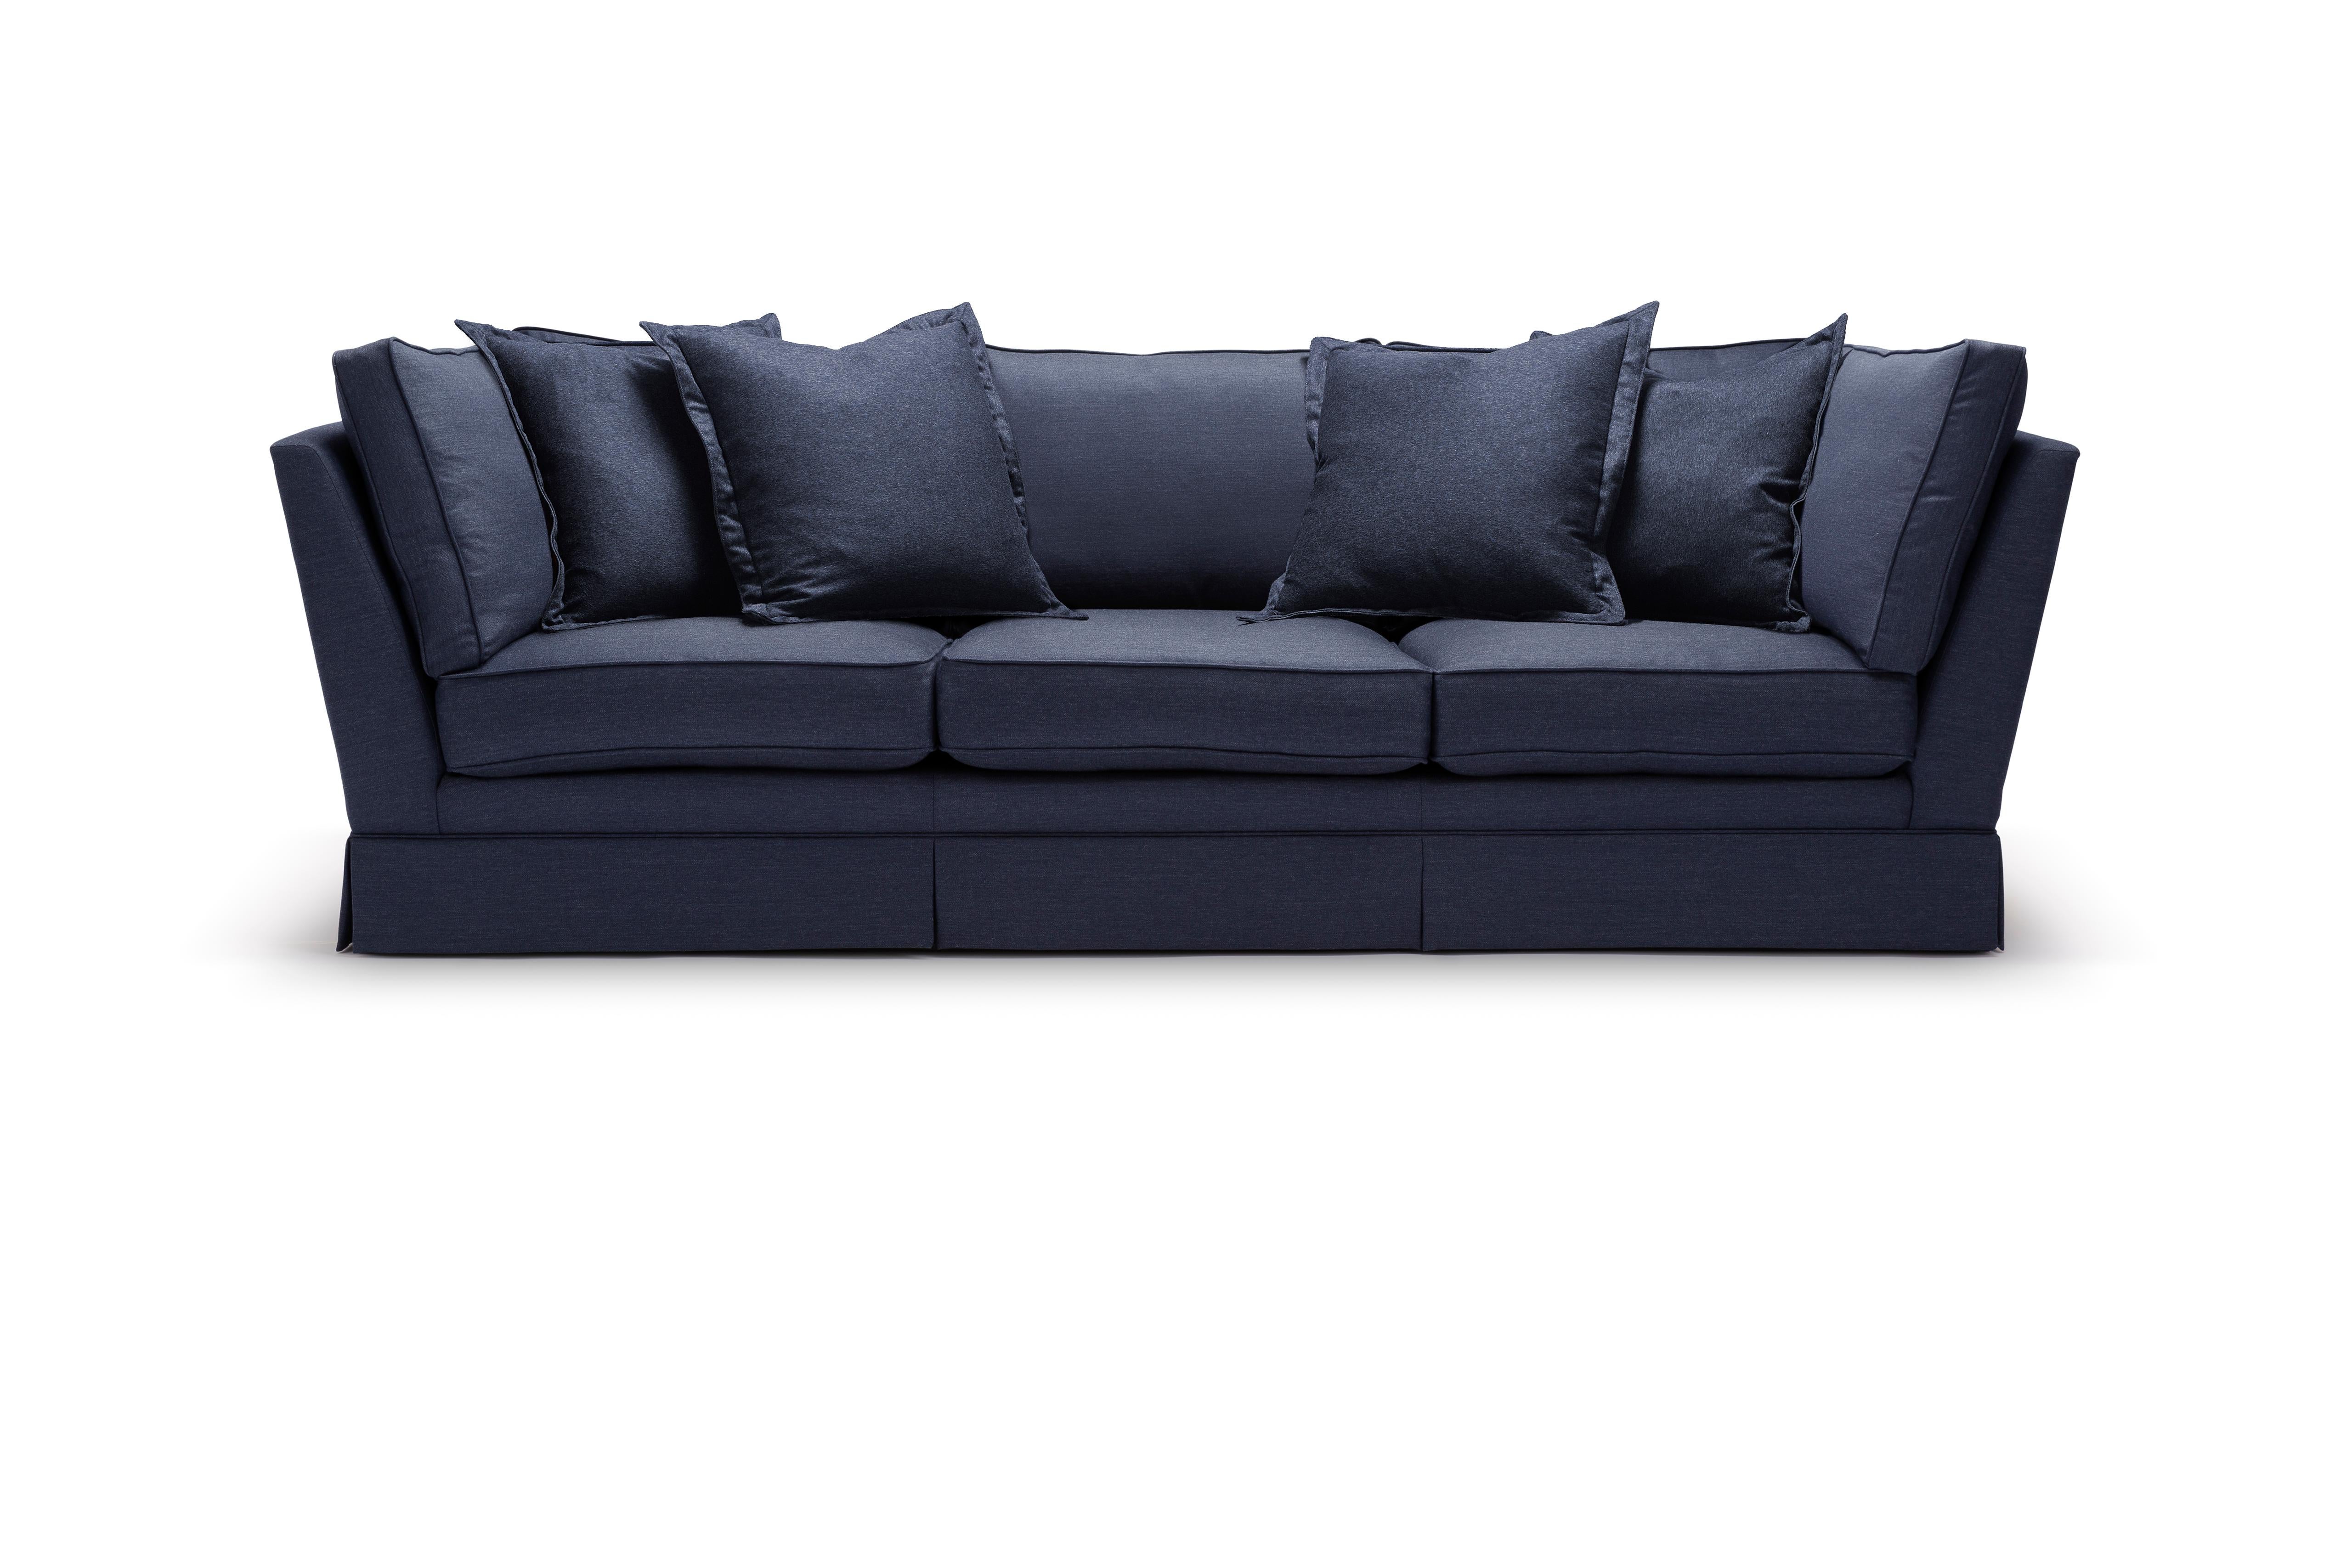 English Luxurious L shaped sofa tailored in British Wool Denim Blue Coil Sprung seat For Sale